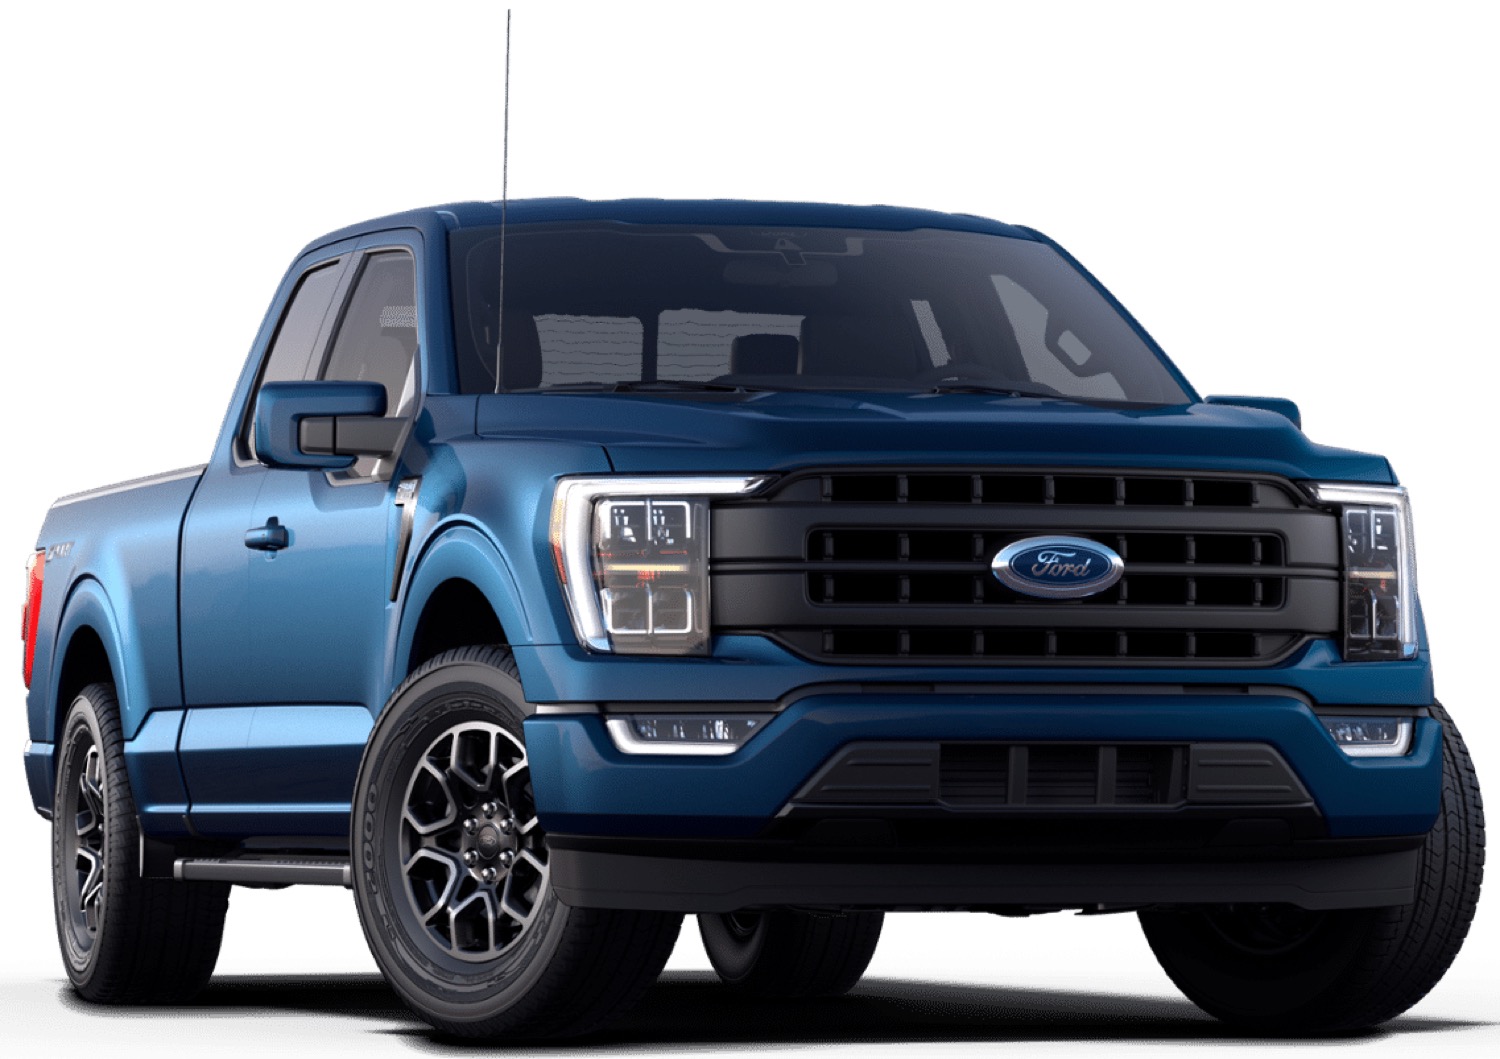 2022 Ford F 150 Gains New Atlas Blue Metallic Color First Look Ford